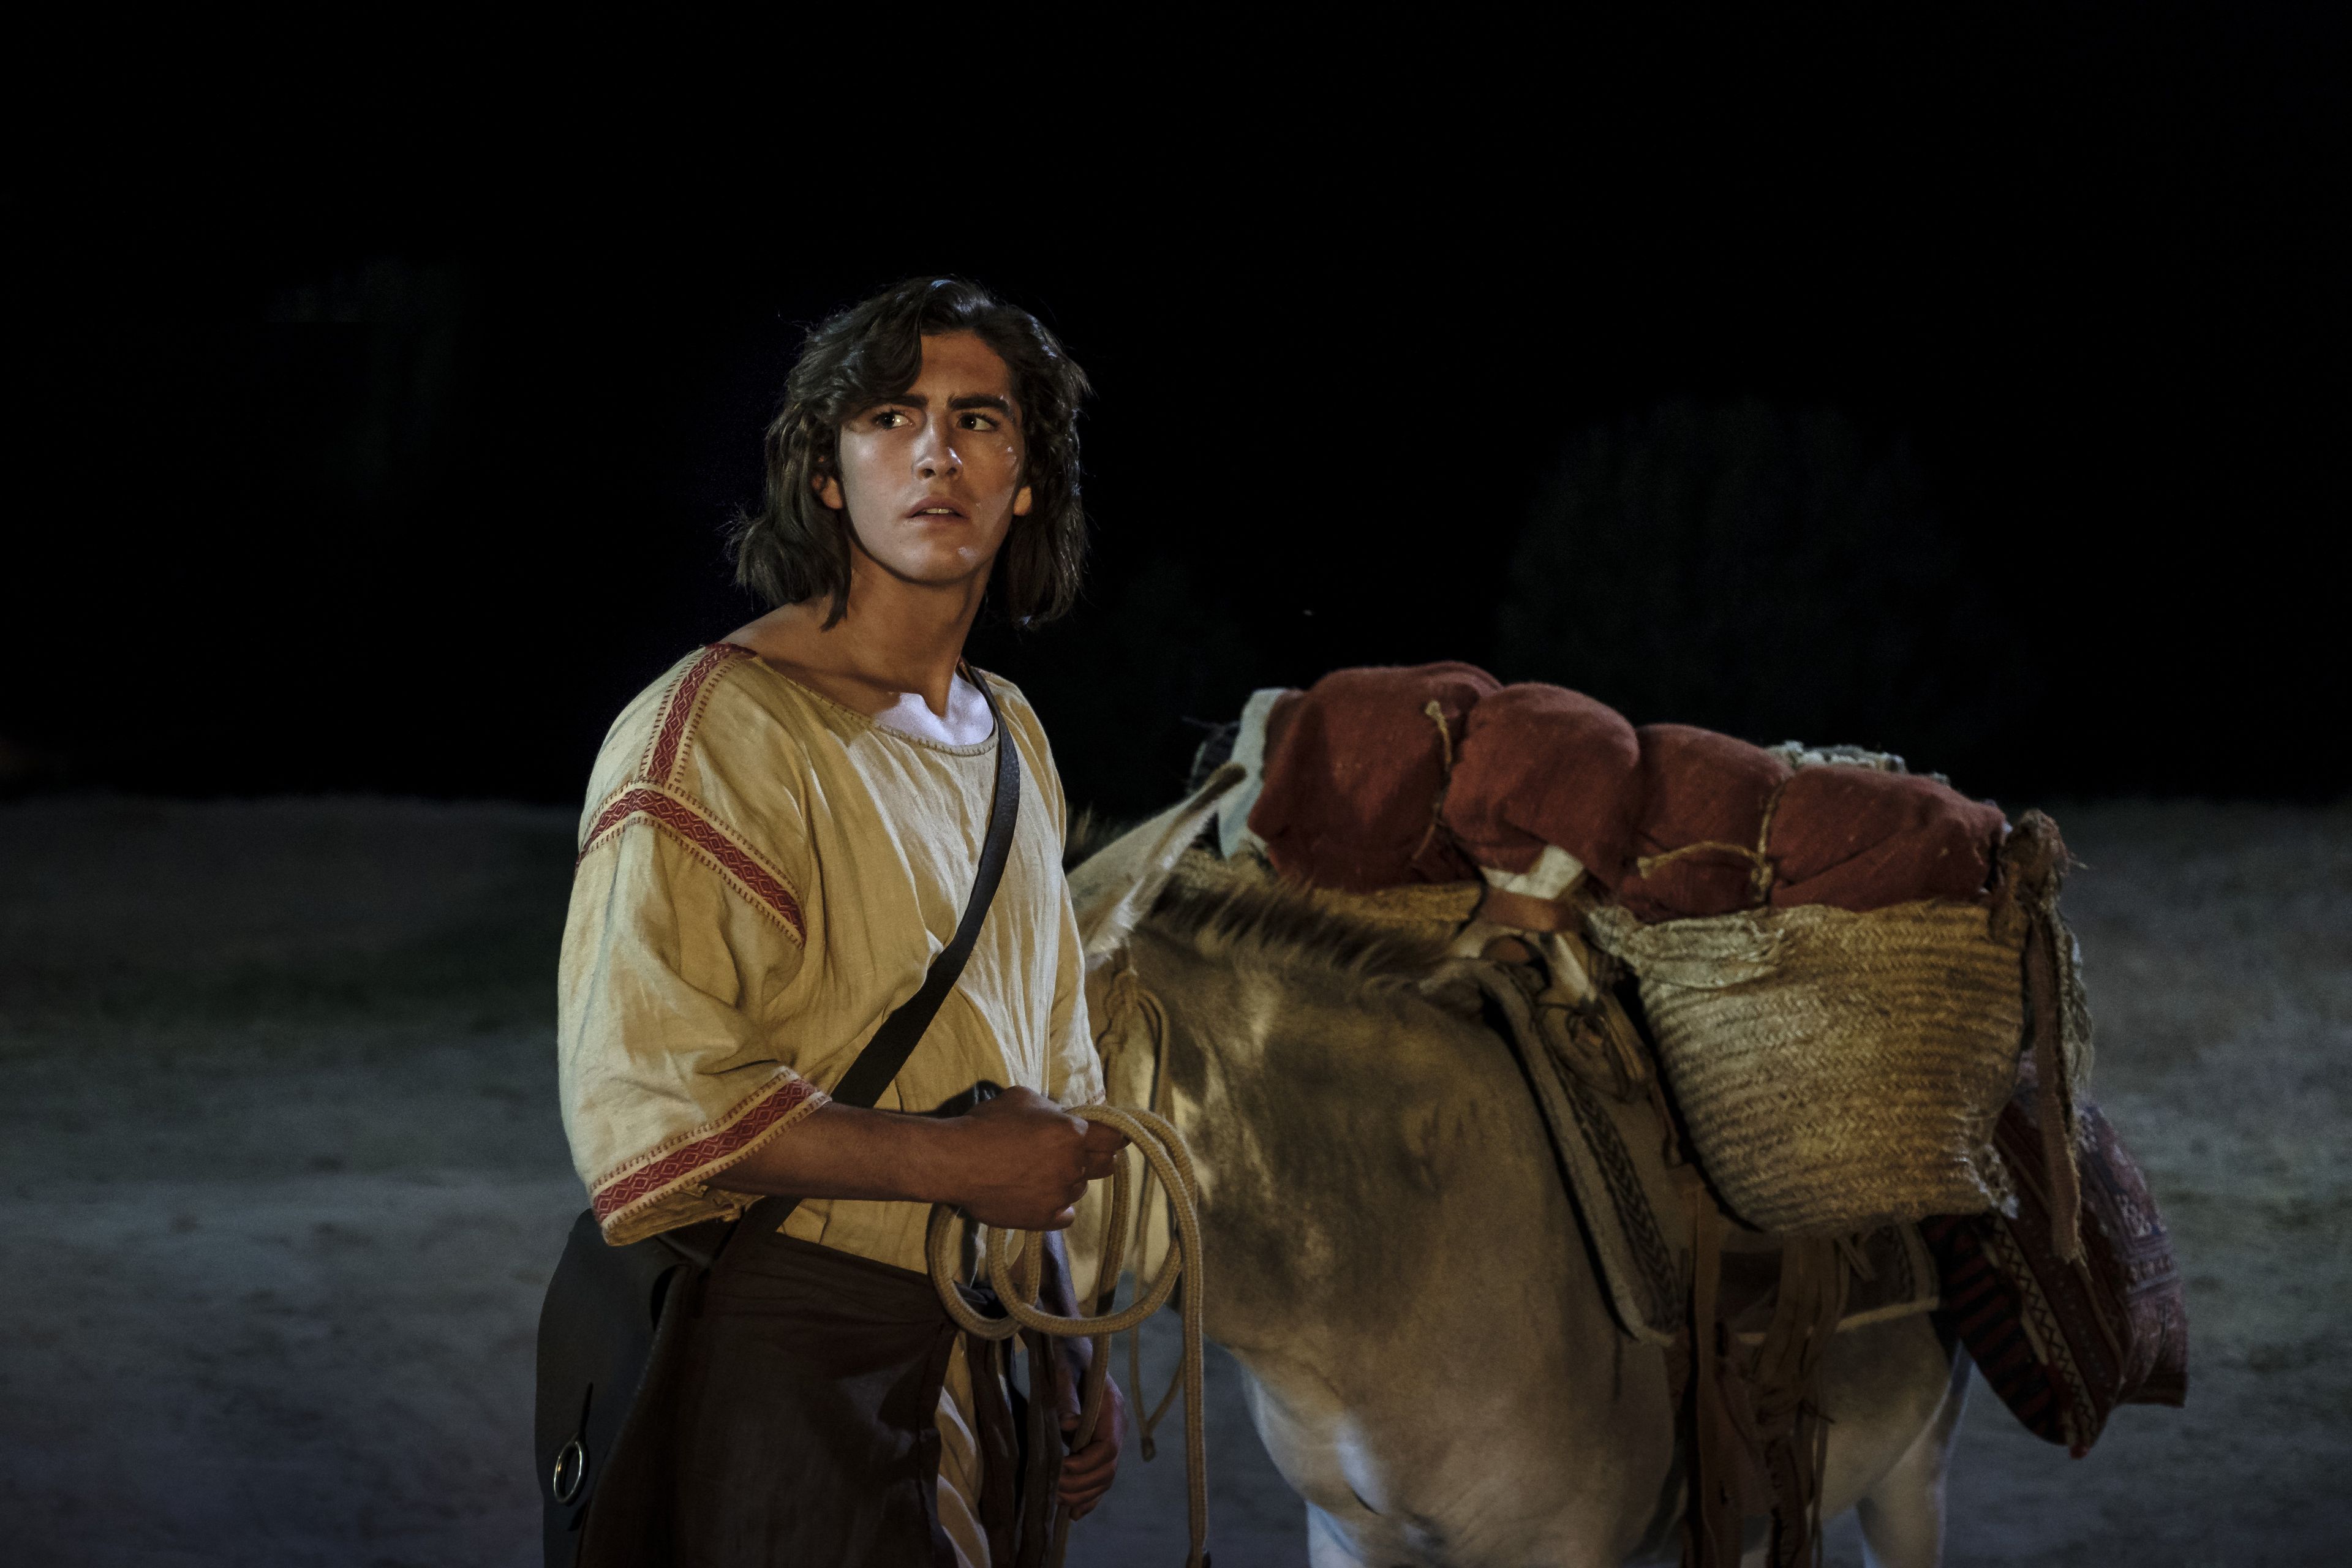 Nephi stands with a donkey at night.